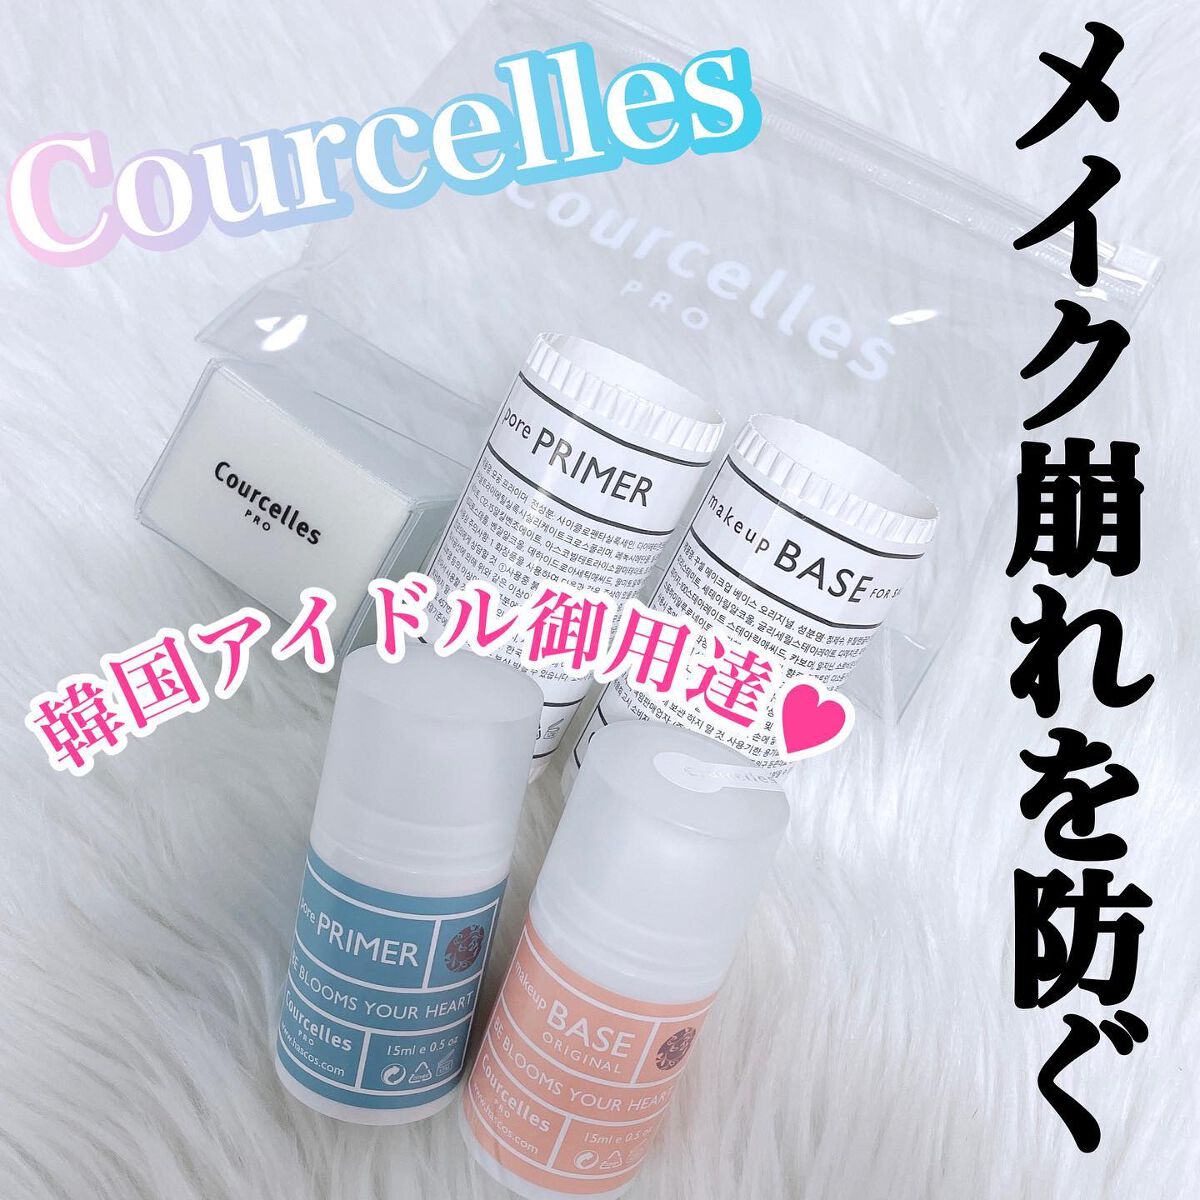 Courcelles クーセル　ベースメイクセット